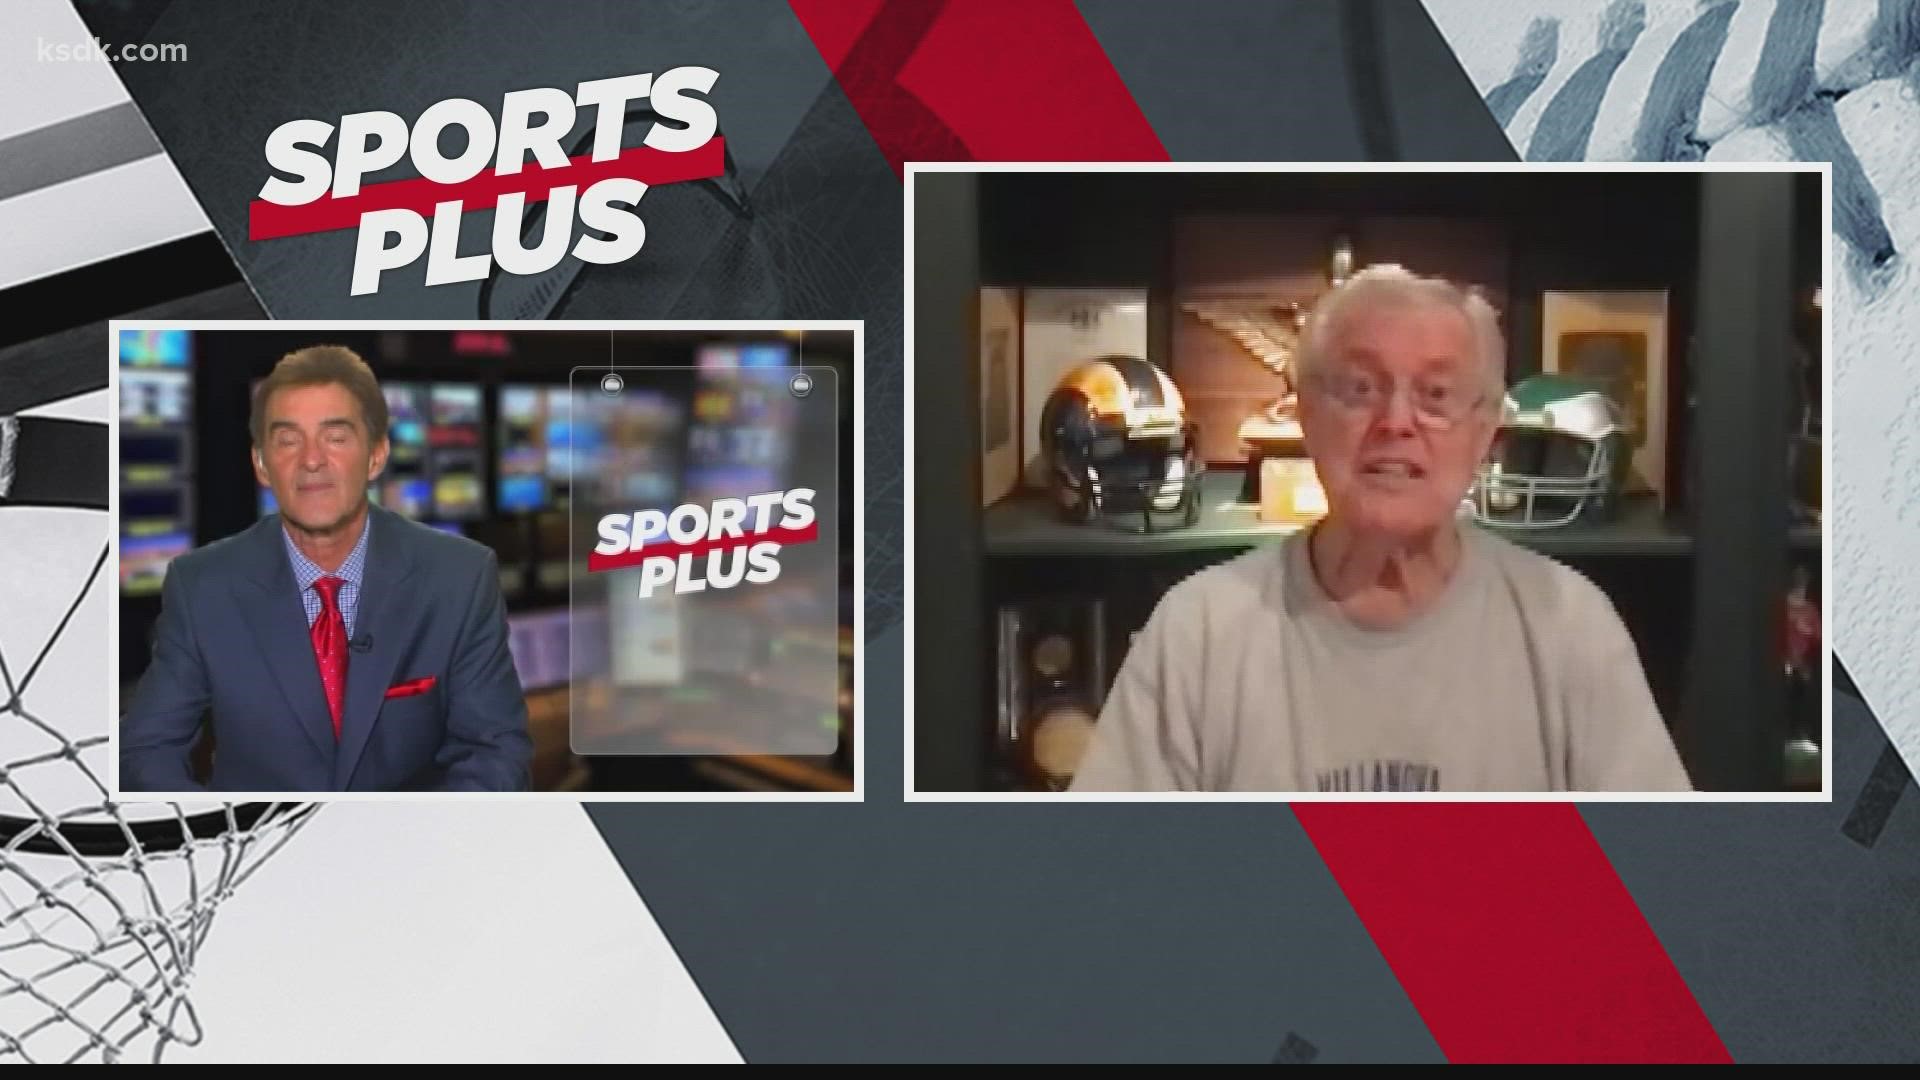 Part 1 of our sports plus interview with former St. Louis Rams head coach Dick Vermeil. Vermeil talks "American Underdog", Rams settlement and his perfect Sunday.